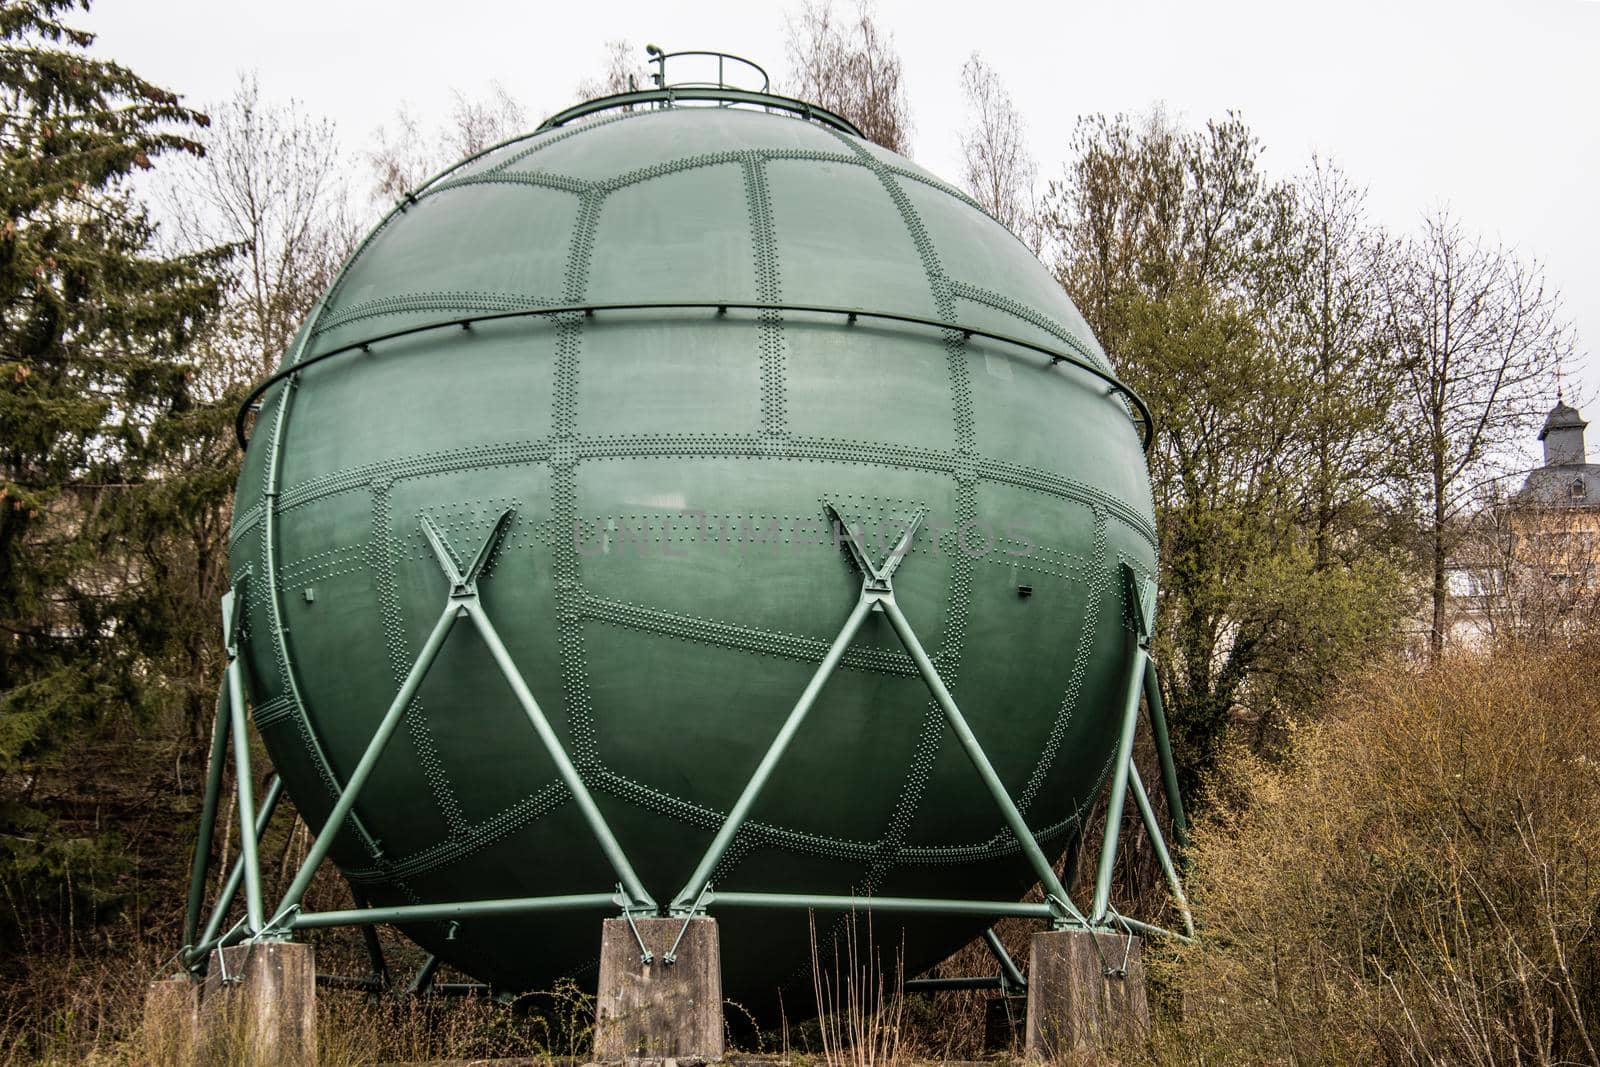 spherical antique gas tank as an industrial monument